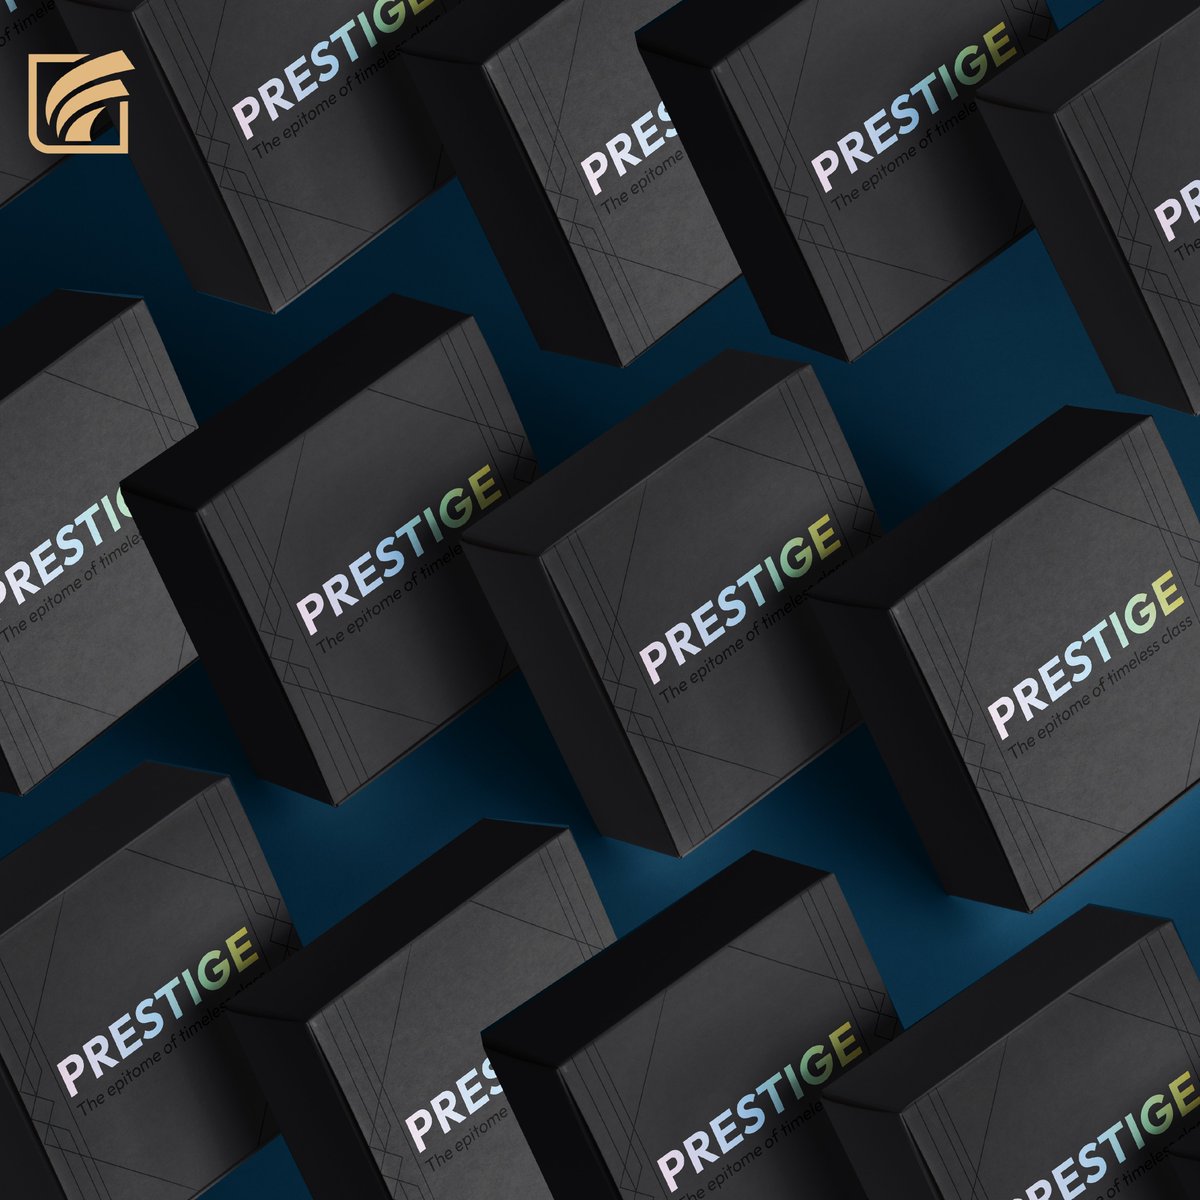 Get a taste of luxury with the FEB Prestige debit card, packaged to match your executive vibe. Apply now and elevate your financial presence 💎💳✨   #CorporateUnveiling #FEBPrestigeStyle #FEB #BusinessBanking #Banking #FinTech #Blockchain #DigitalAssets #BusinessFinance #Smart